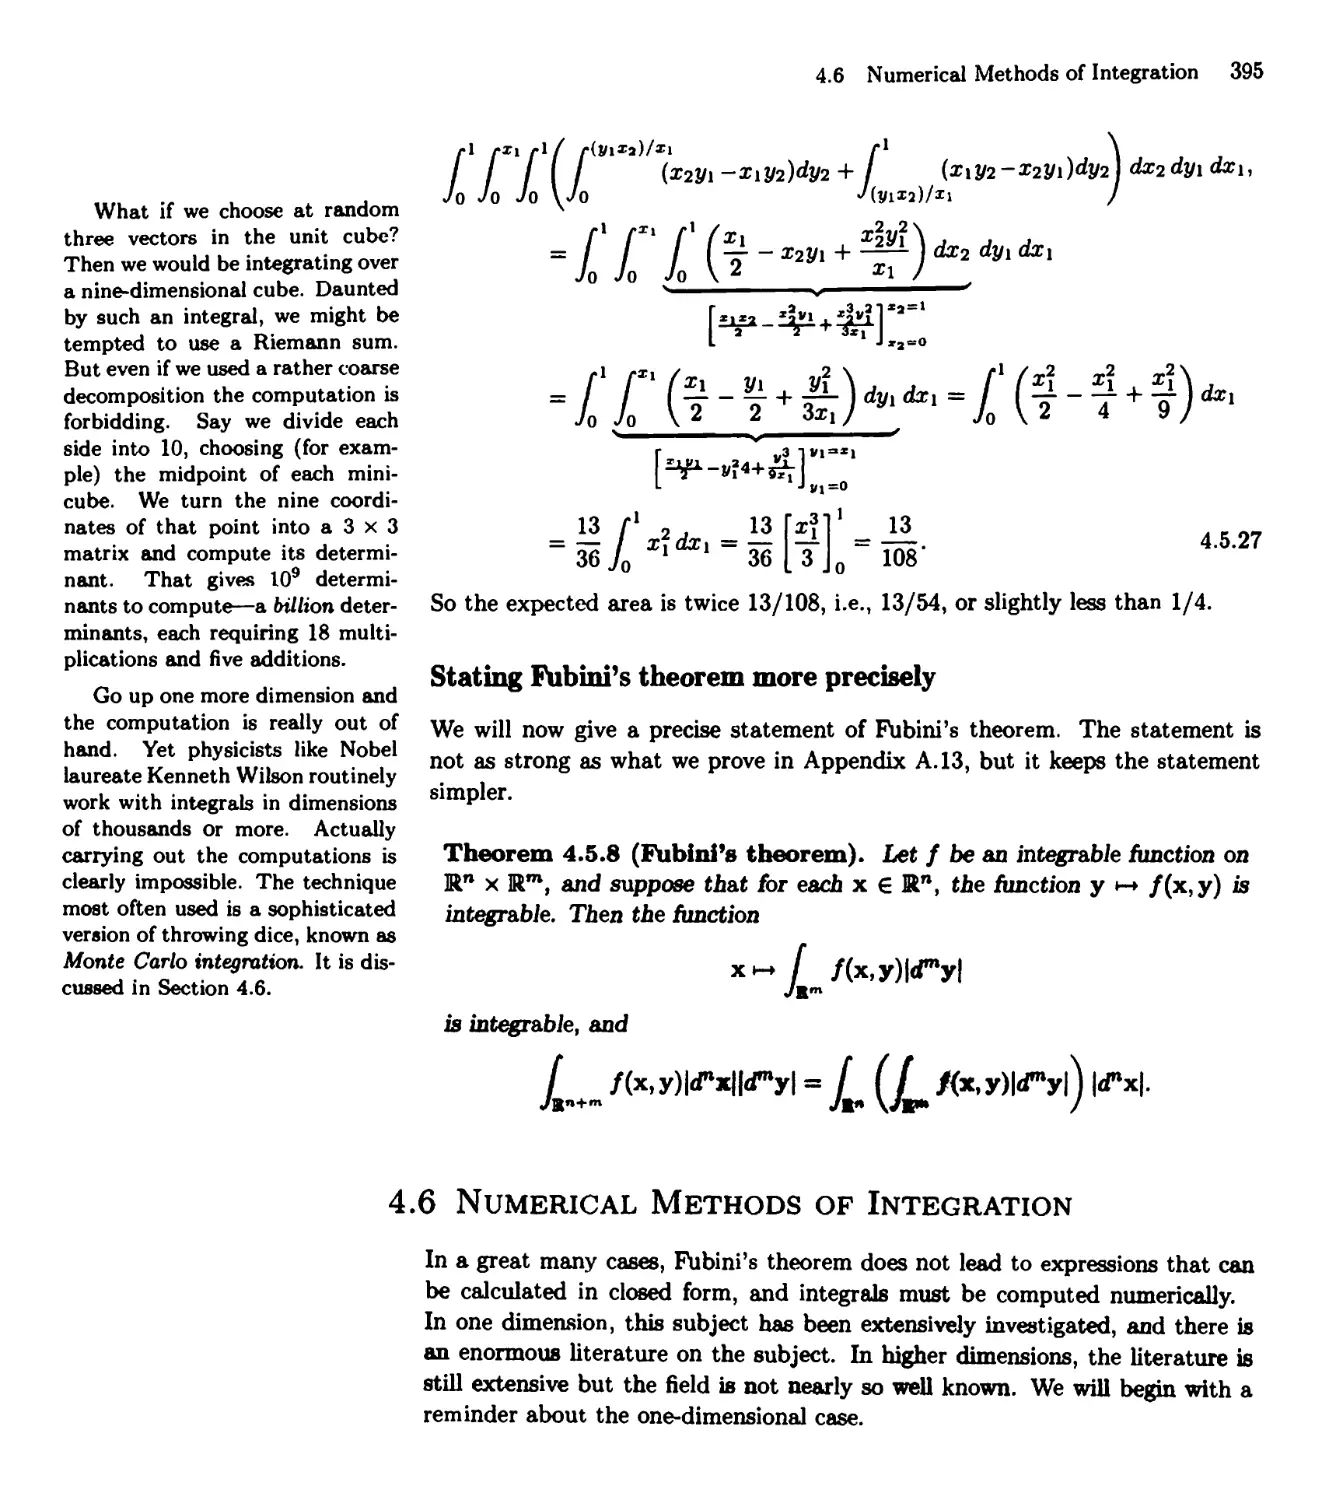 4.6 Numerical Methods of Integration